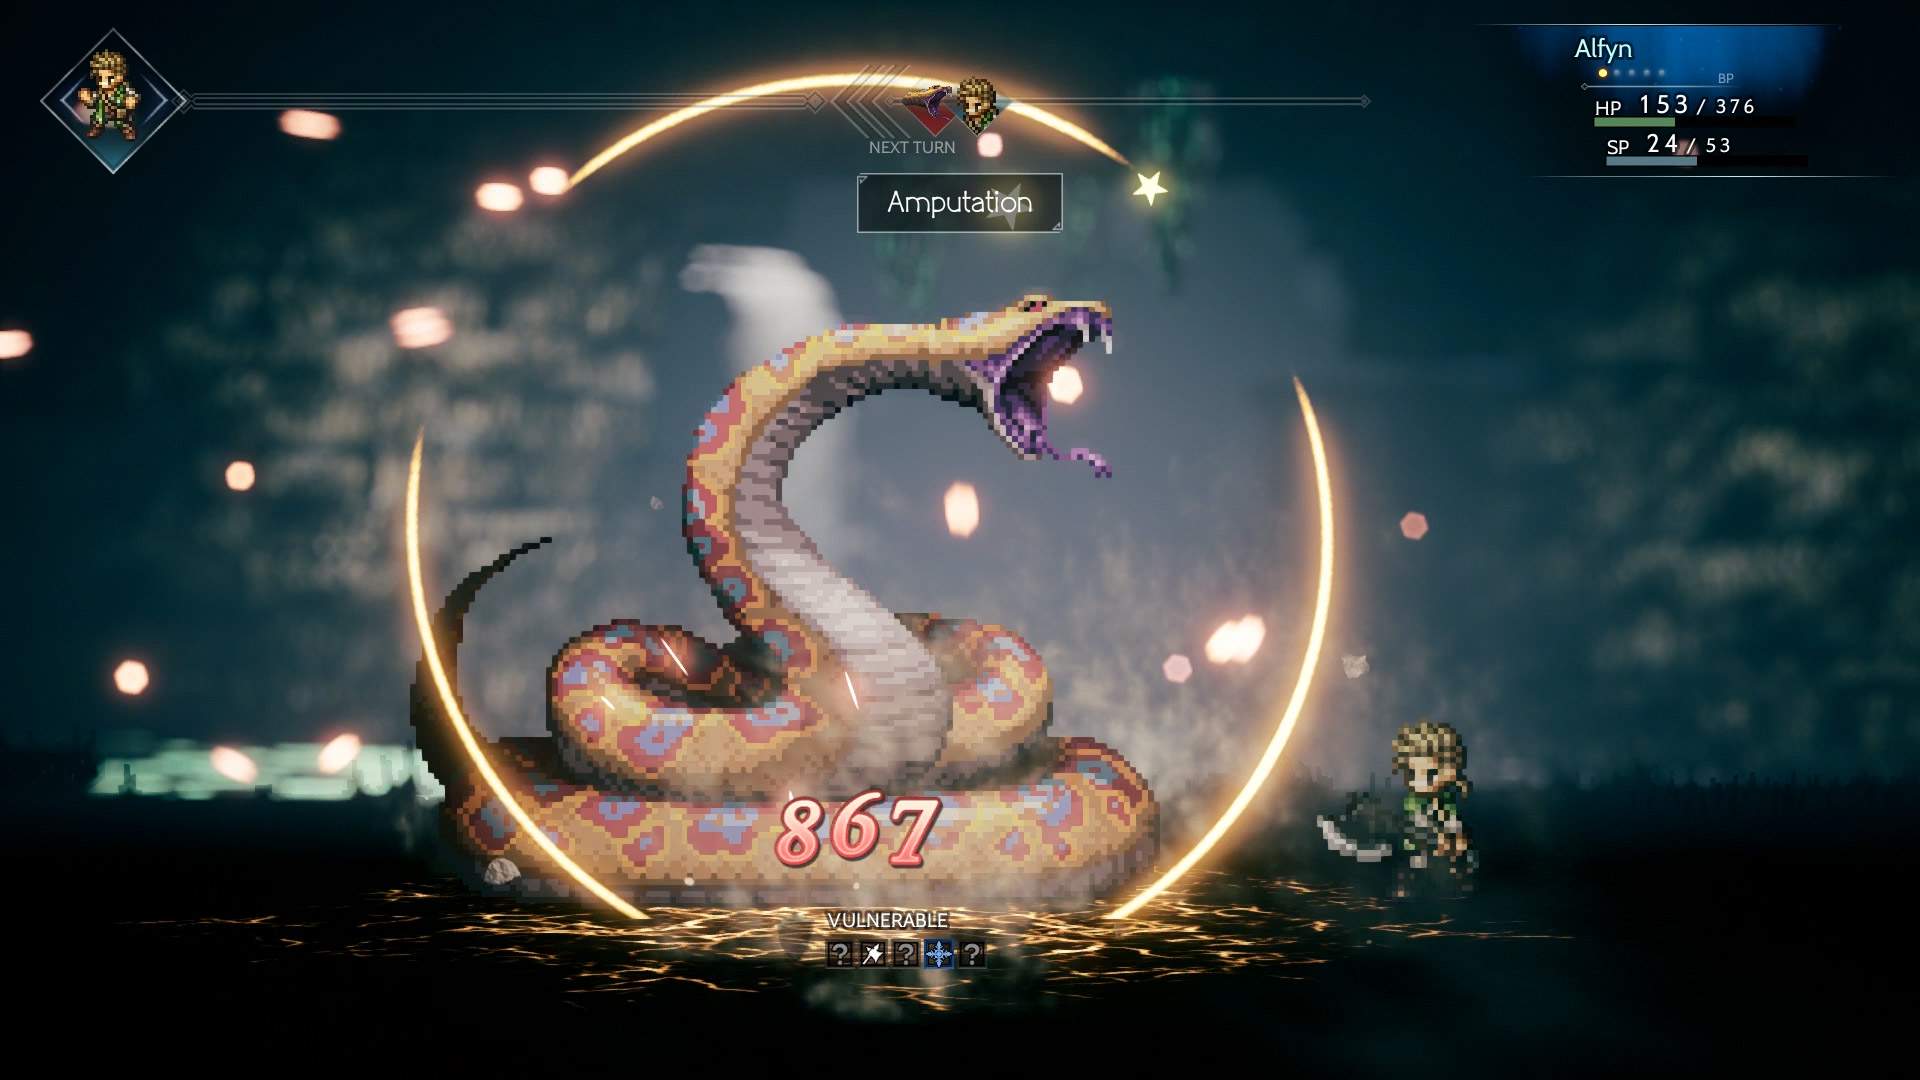 In game battle screenshot showing Alfyn using an attack on a large serpent-like monster in a dungeon